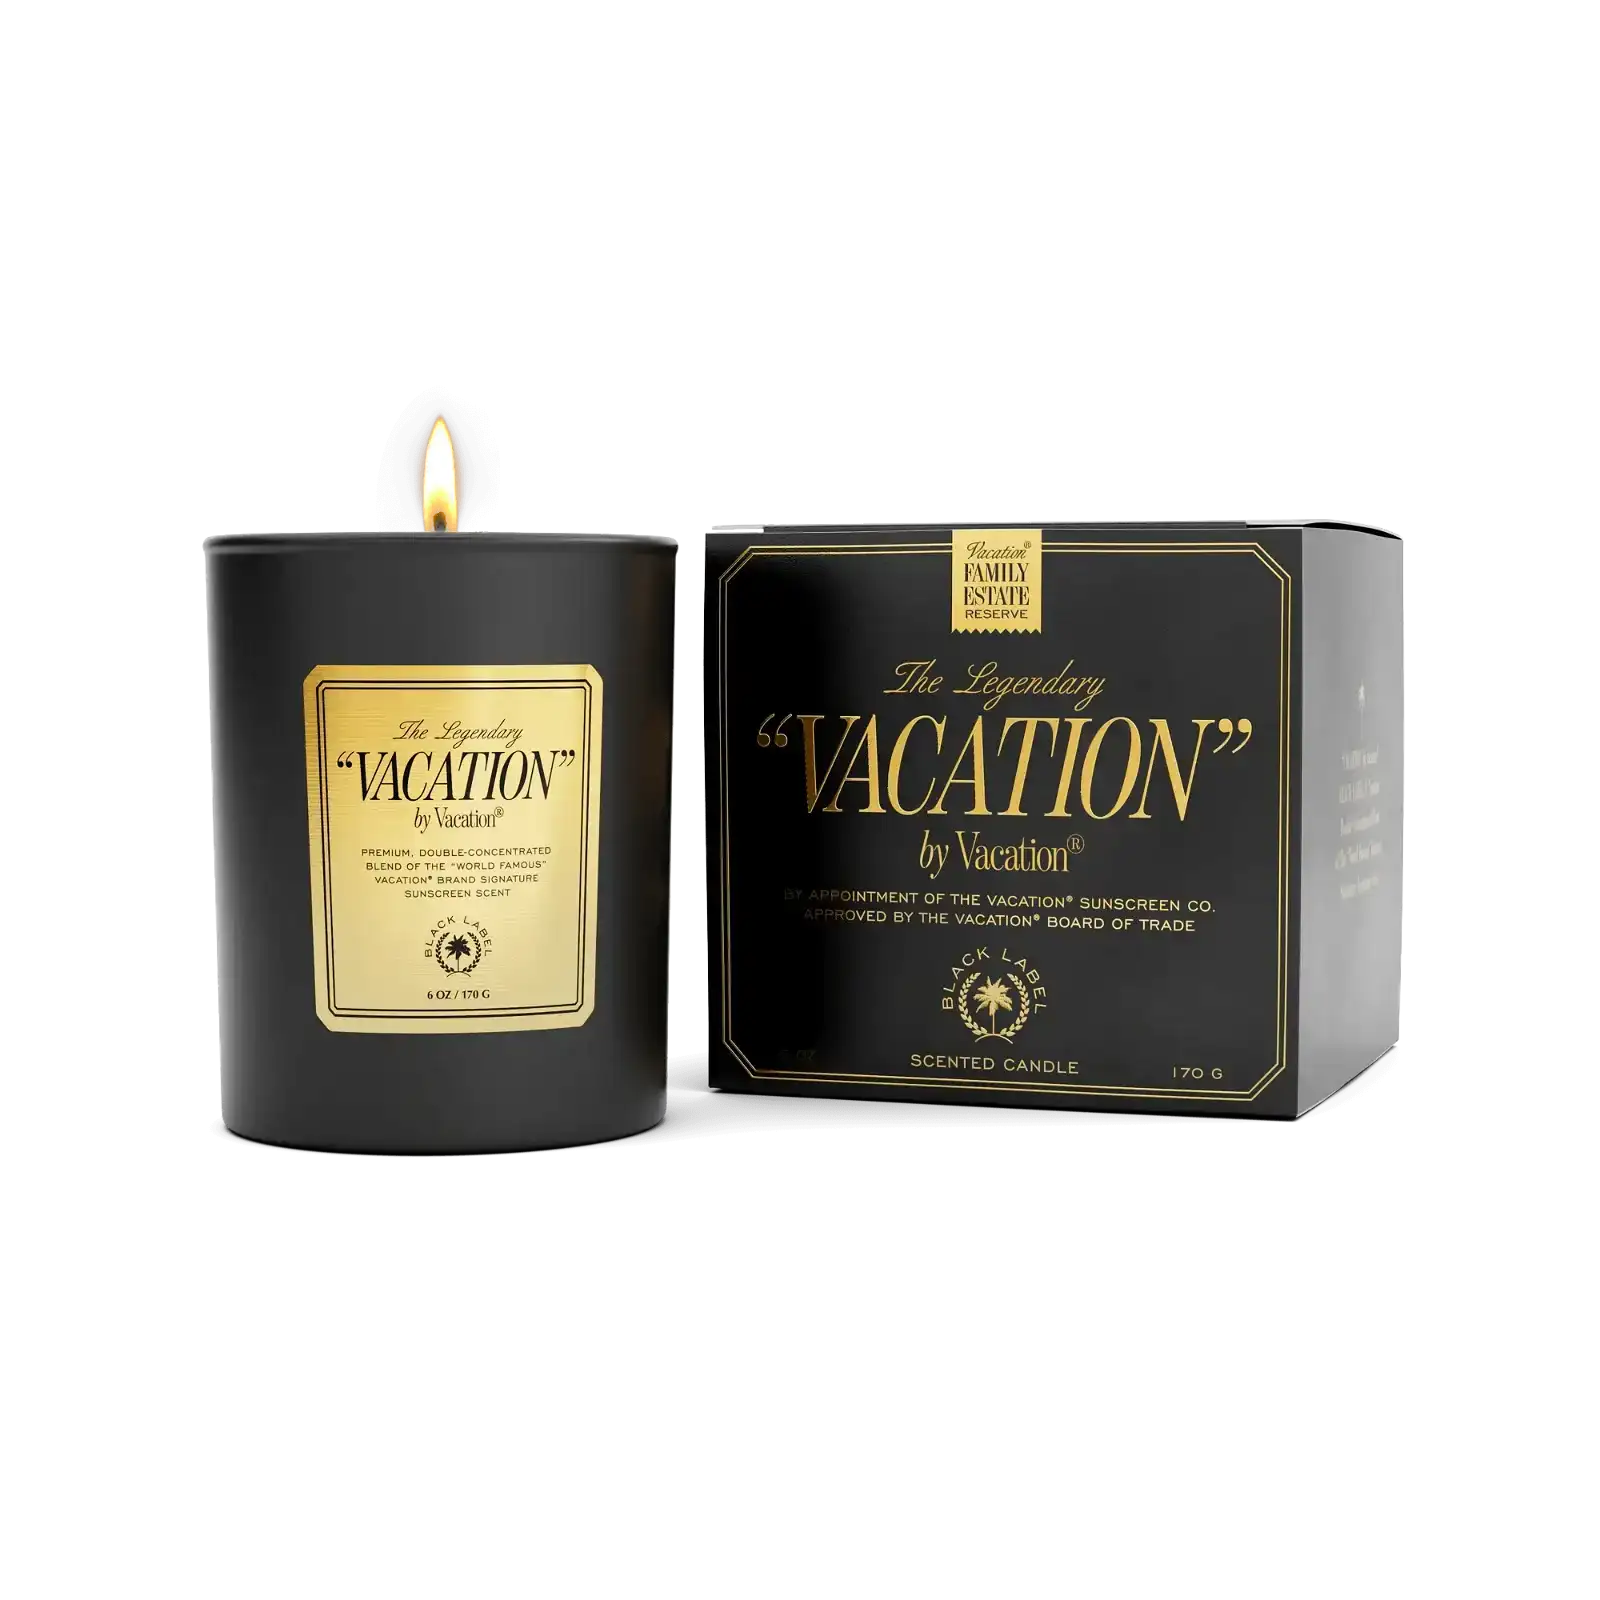 Image of "VACATION" by Vacation® BLACK LABEL